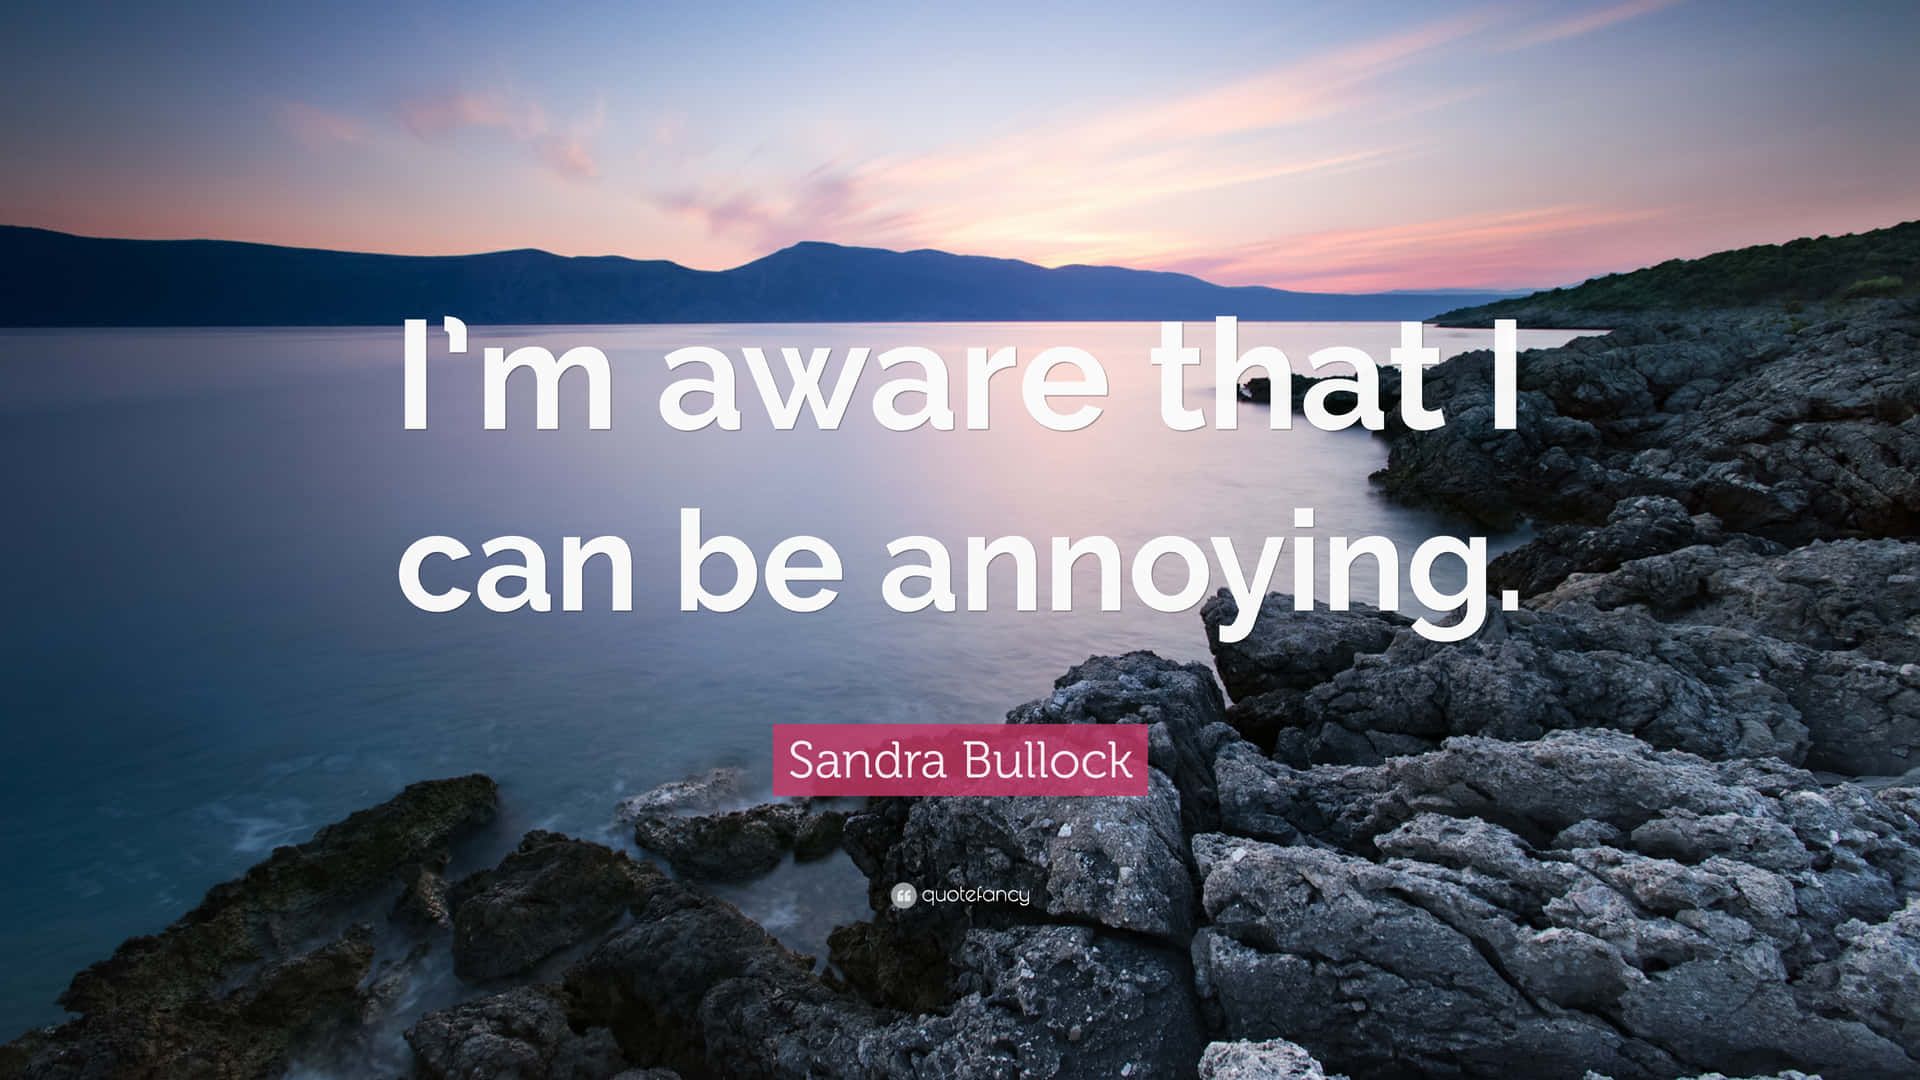 I Cannot Be Annoying Quote By Sandra Bullock Wallpaper